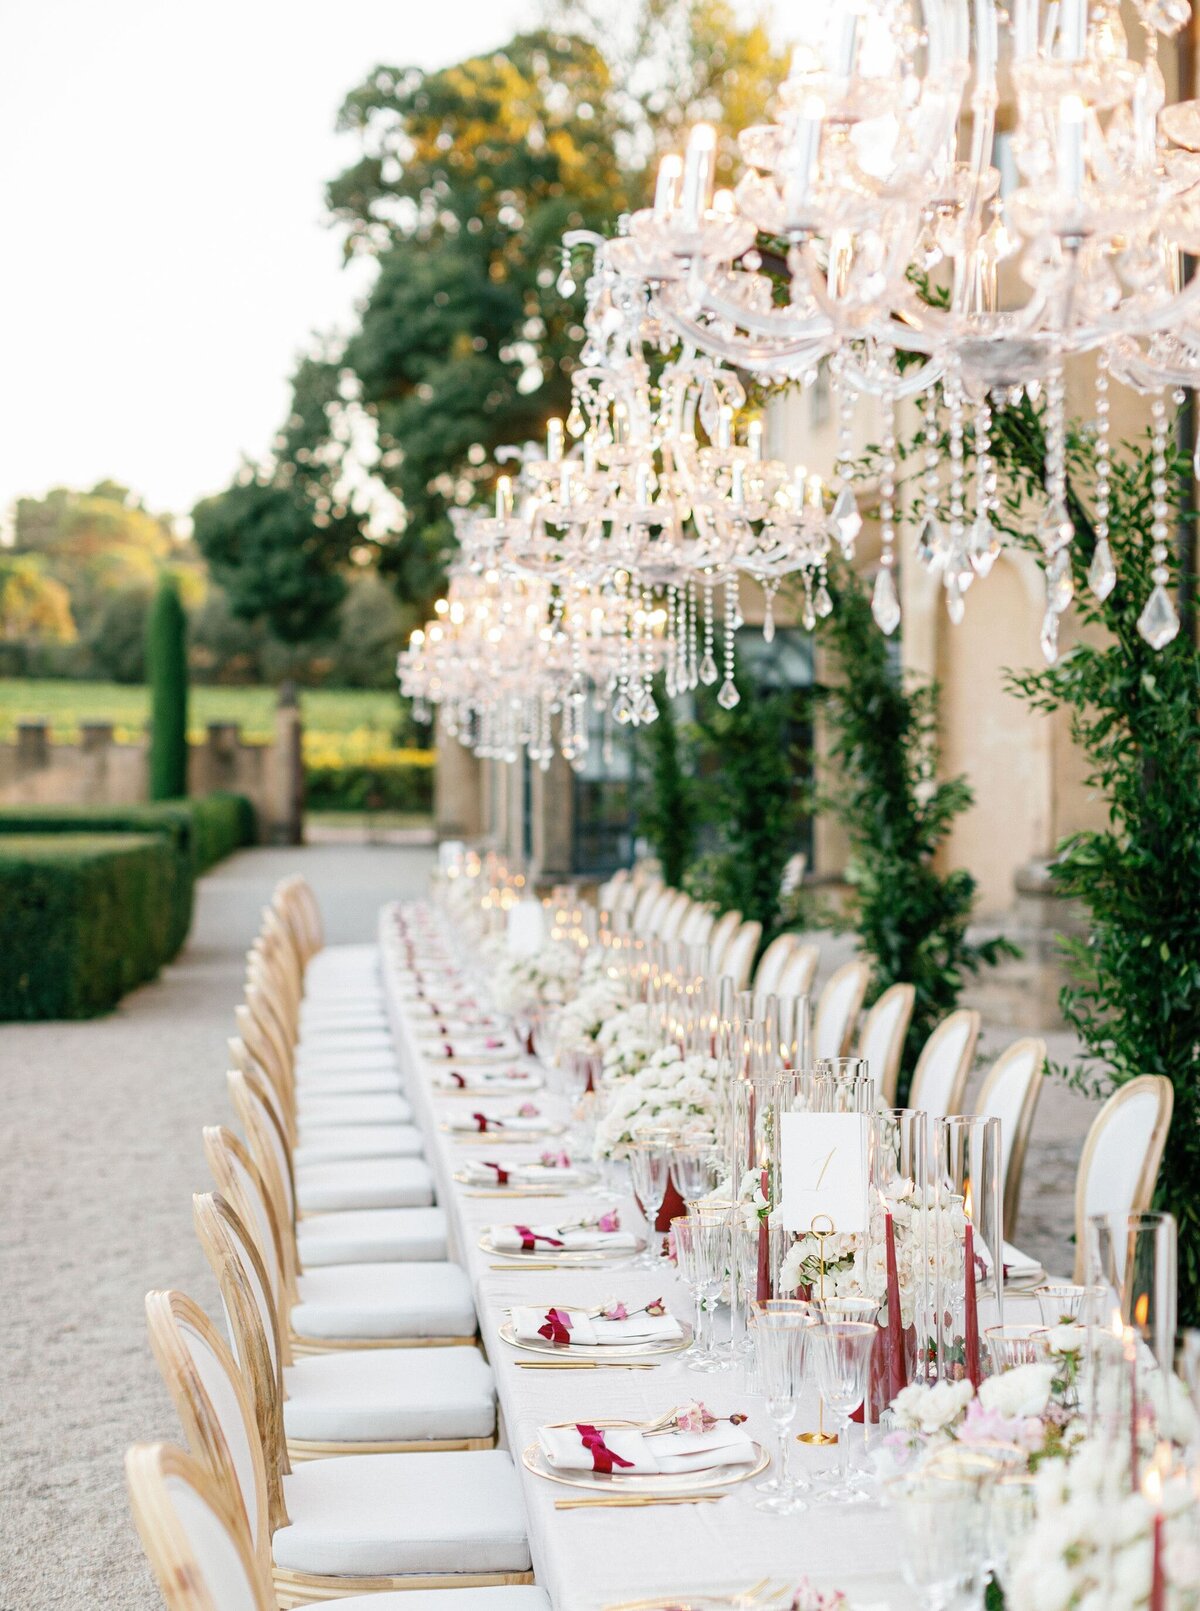 Cristal-chandeliers-above-long-table-white-burgundy